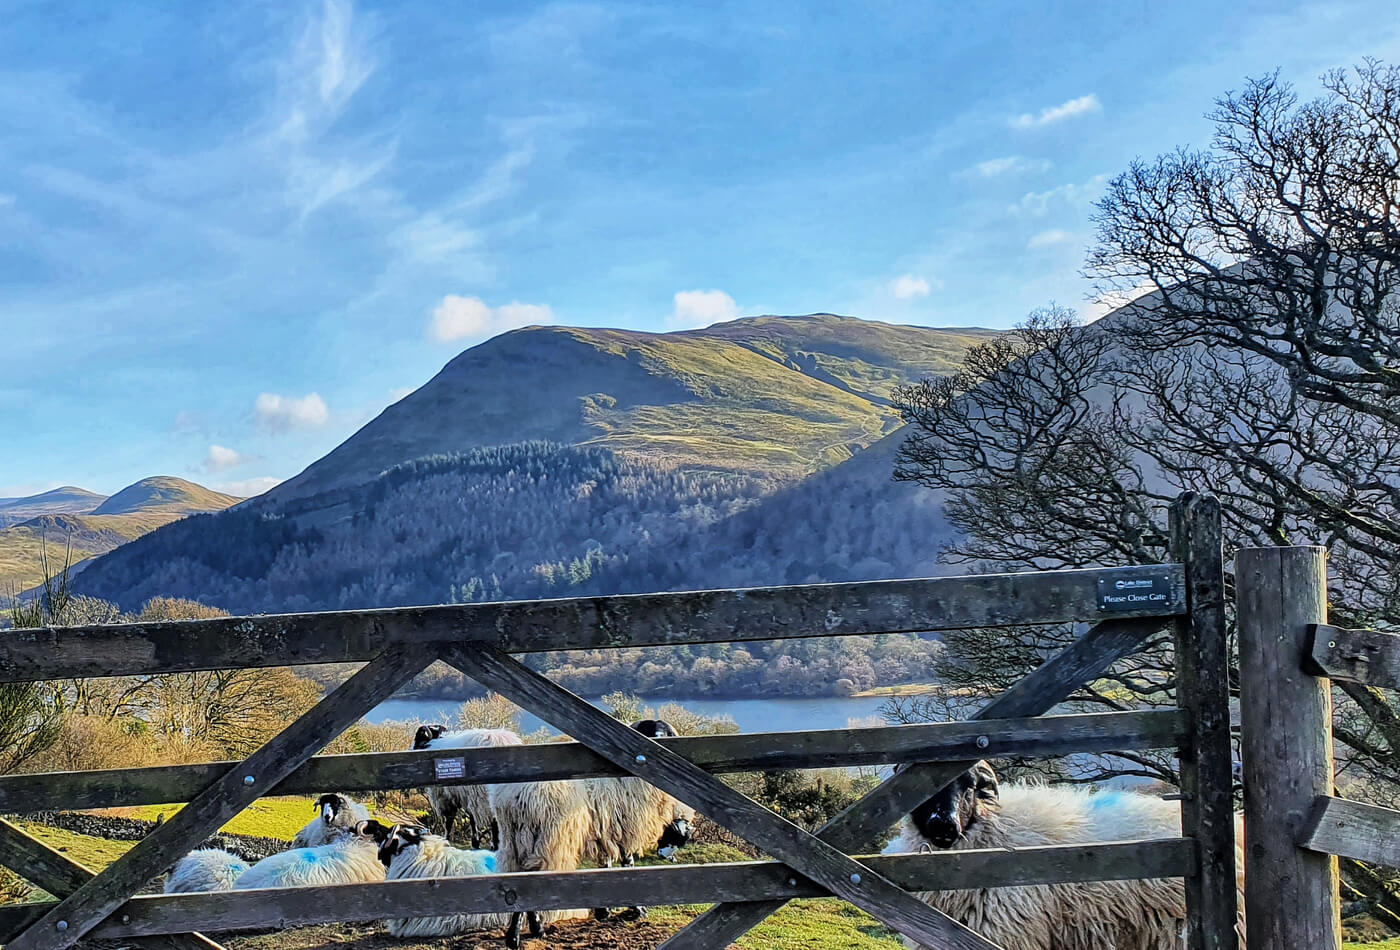 A gate with sheep and mountains in the background in the Lake District